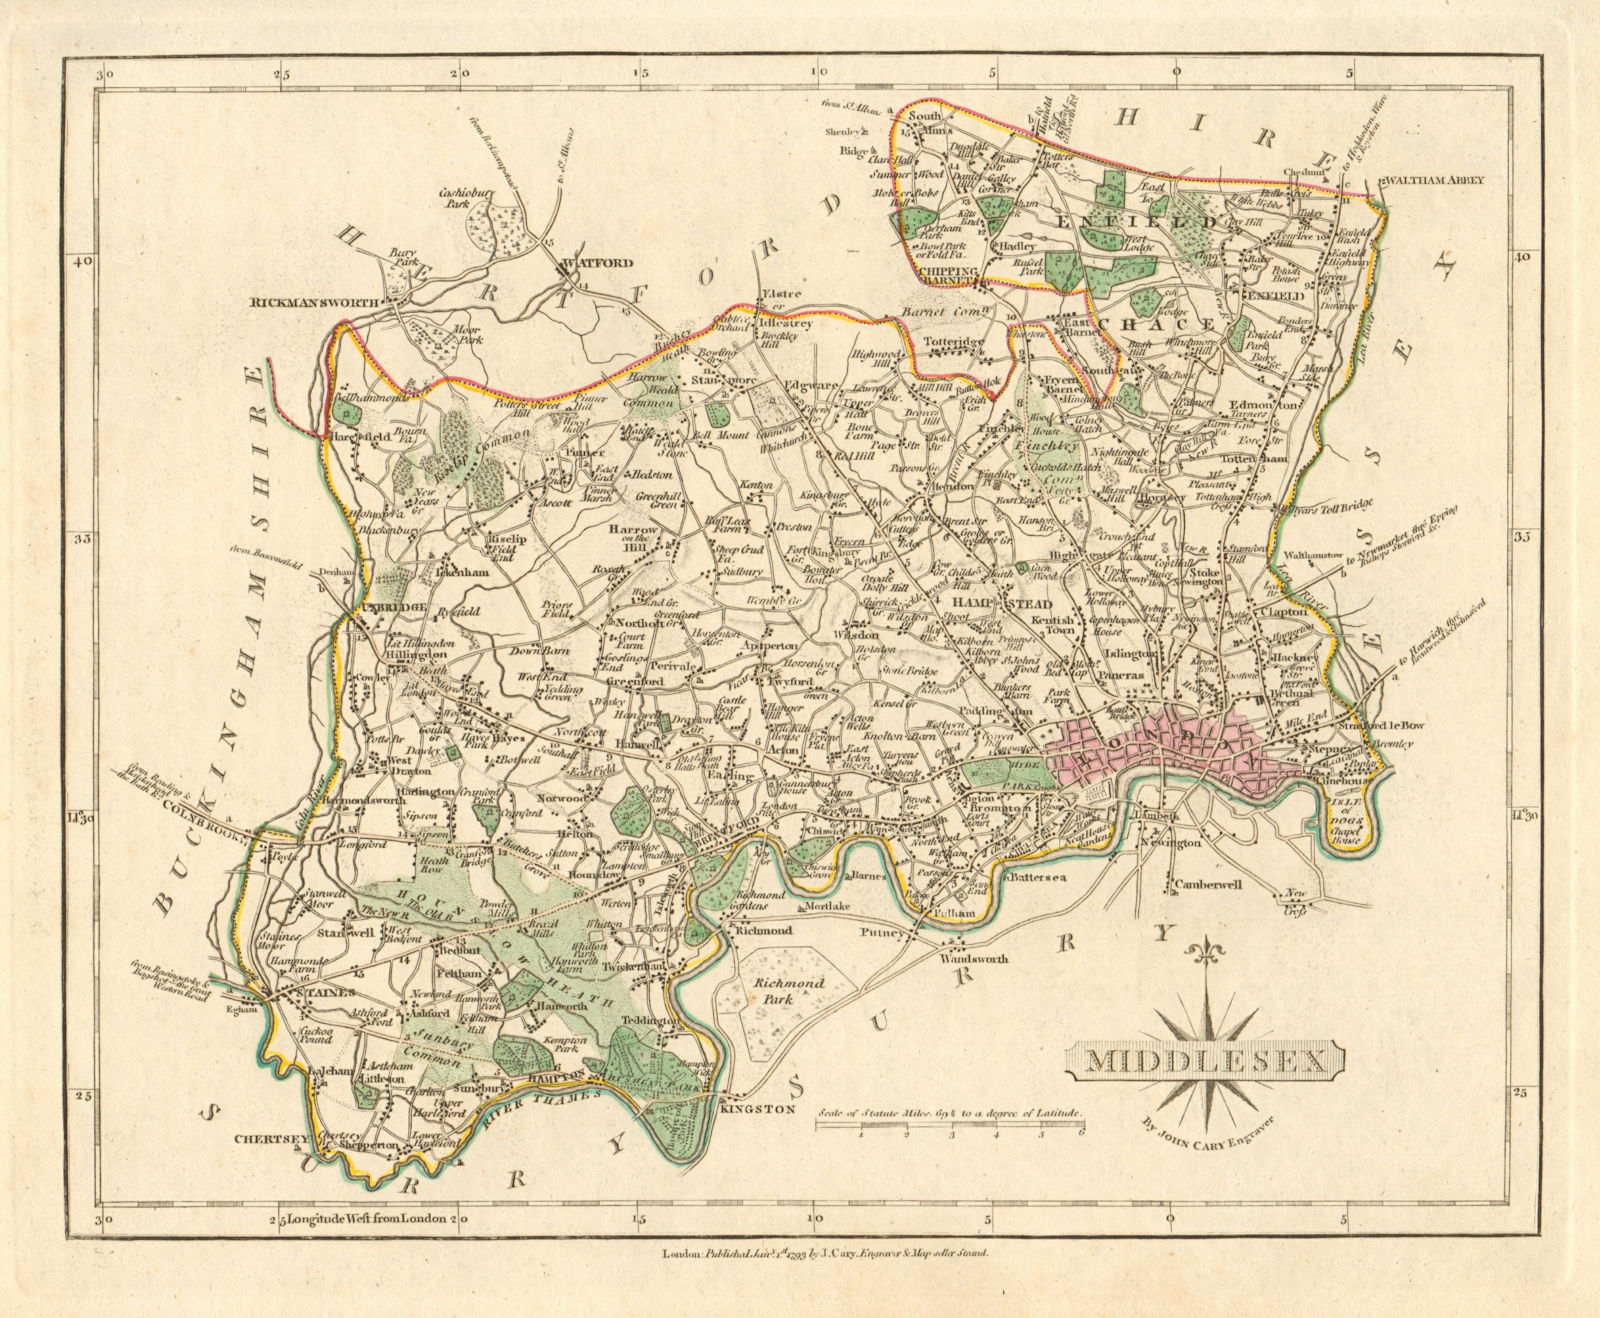 Antique county map of MIDDLESEX by JOHN CARY. Original outline colour 1793